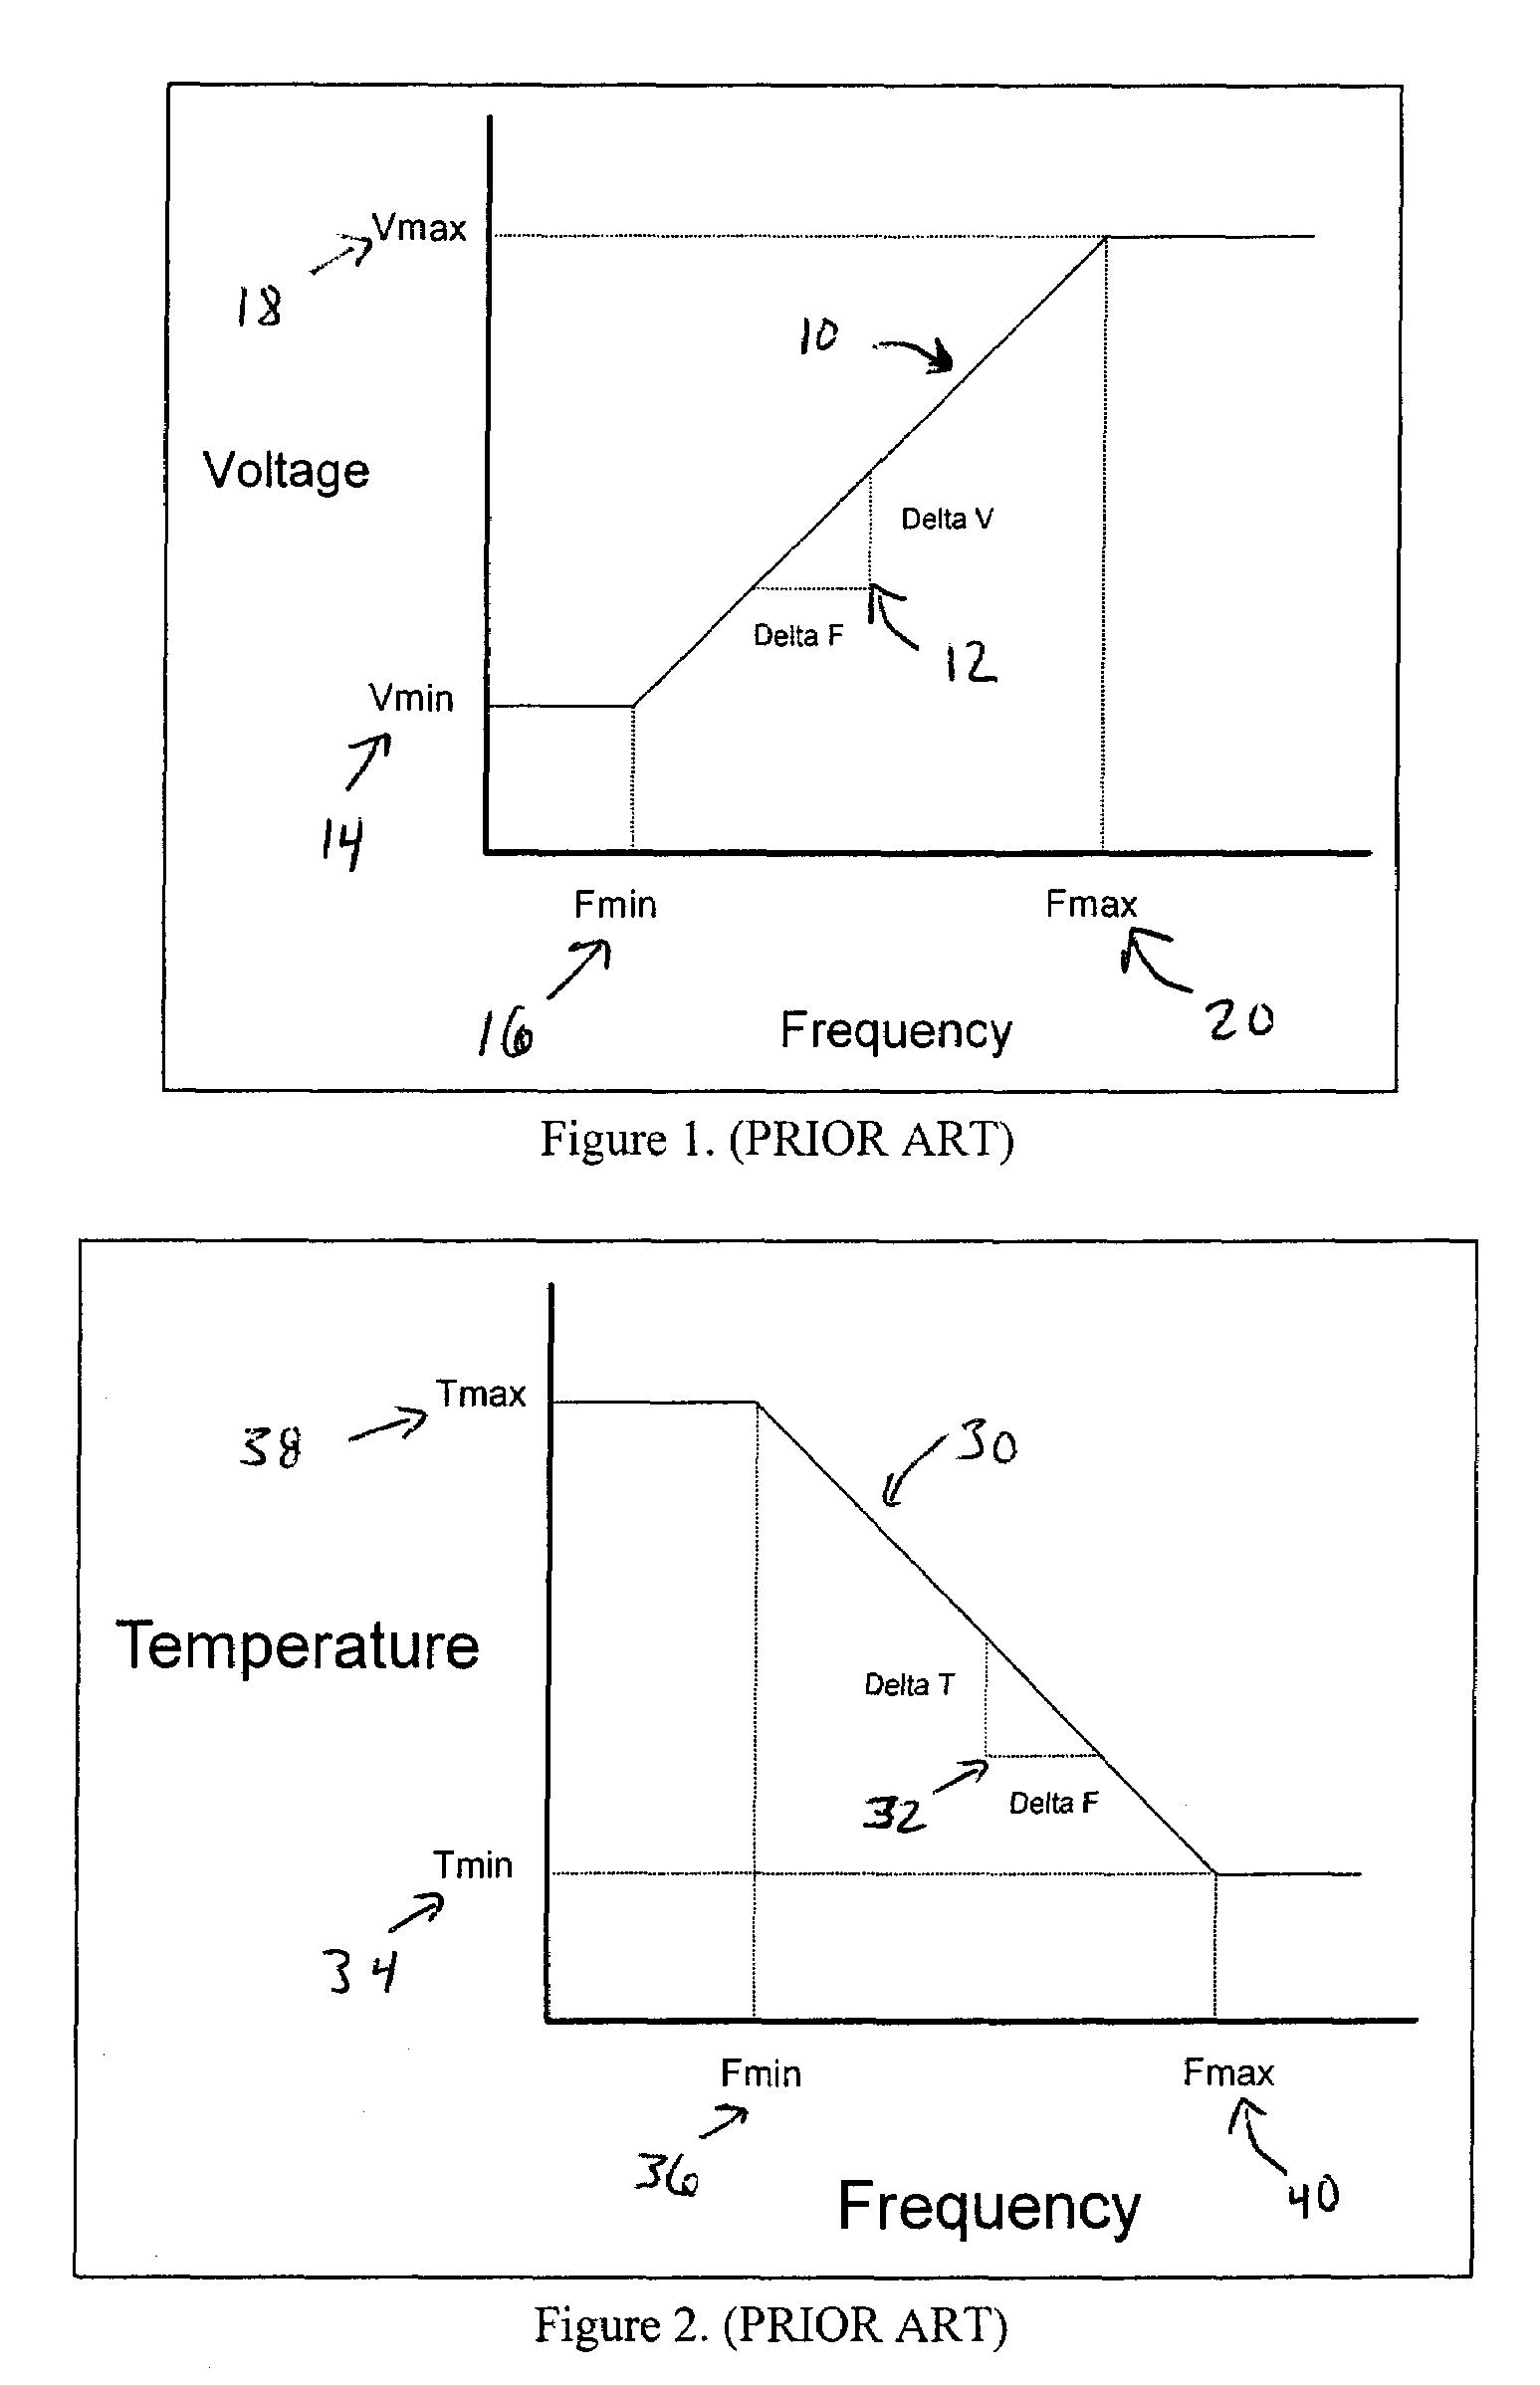 System and method of controlling power consumption in an electronic system by applying a uniquely determined minimum operating voltage to an integrated circuit rather than a predetermined nominal voltage selected for a family of integrated circuits